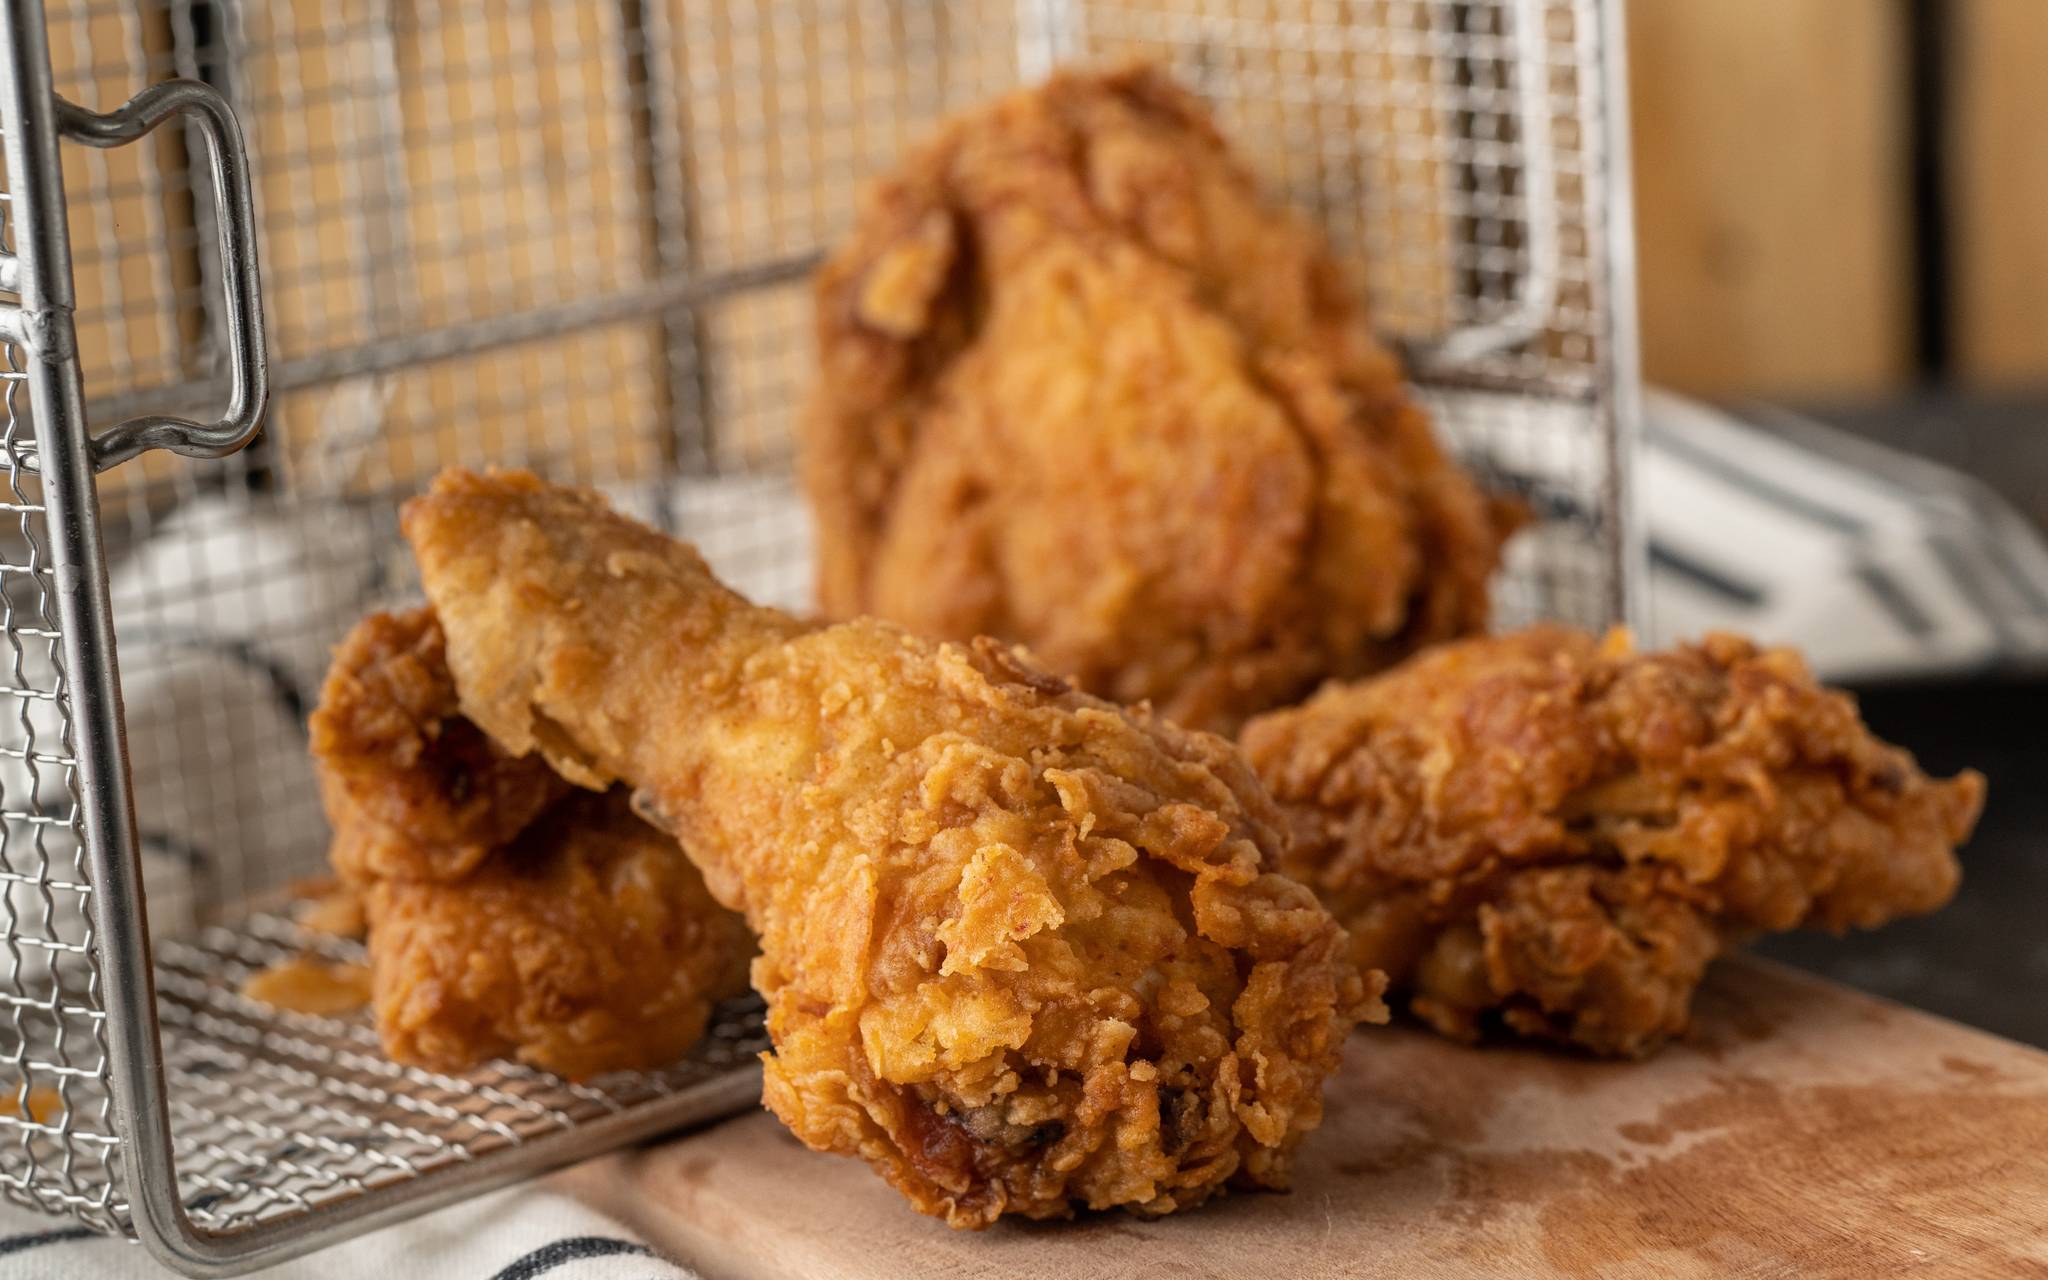 Britons would prefer fried chicken over a roast